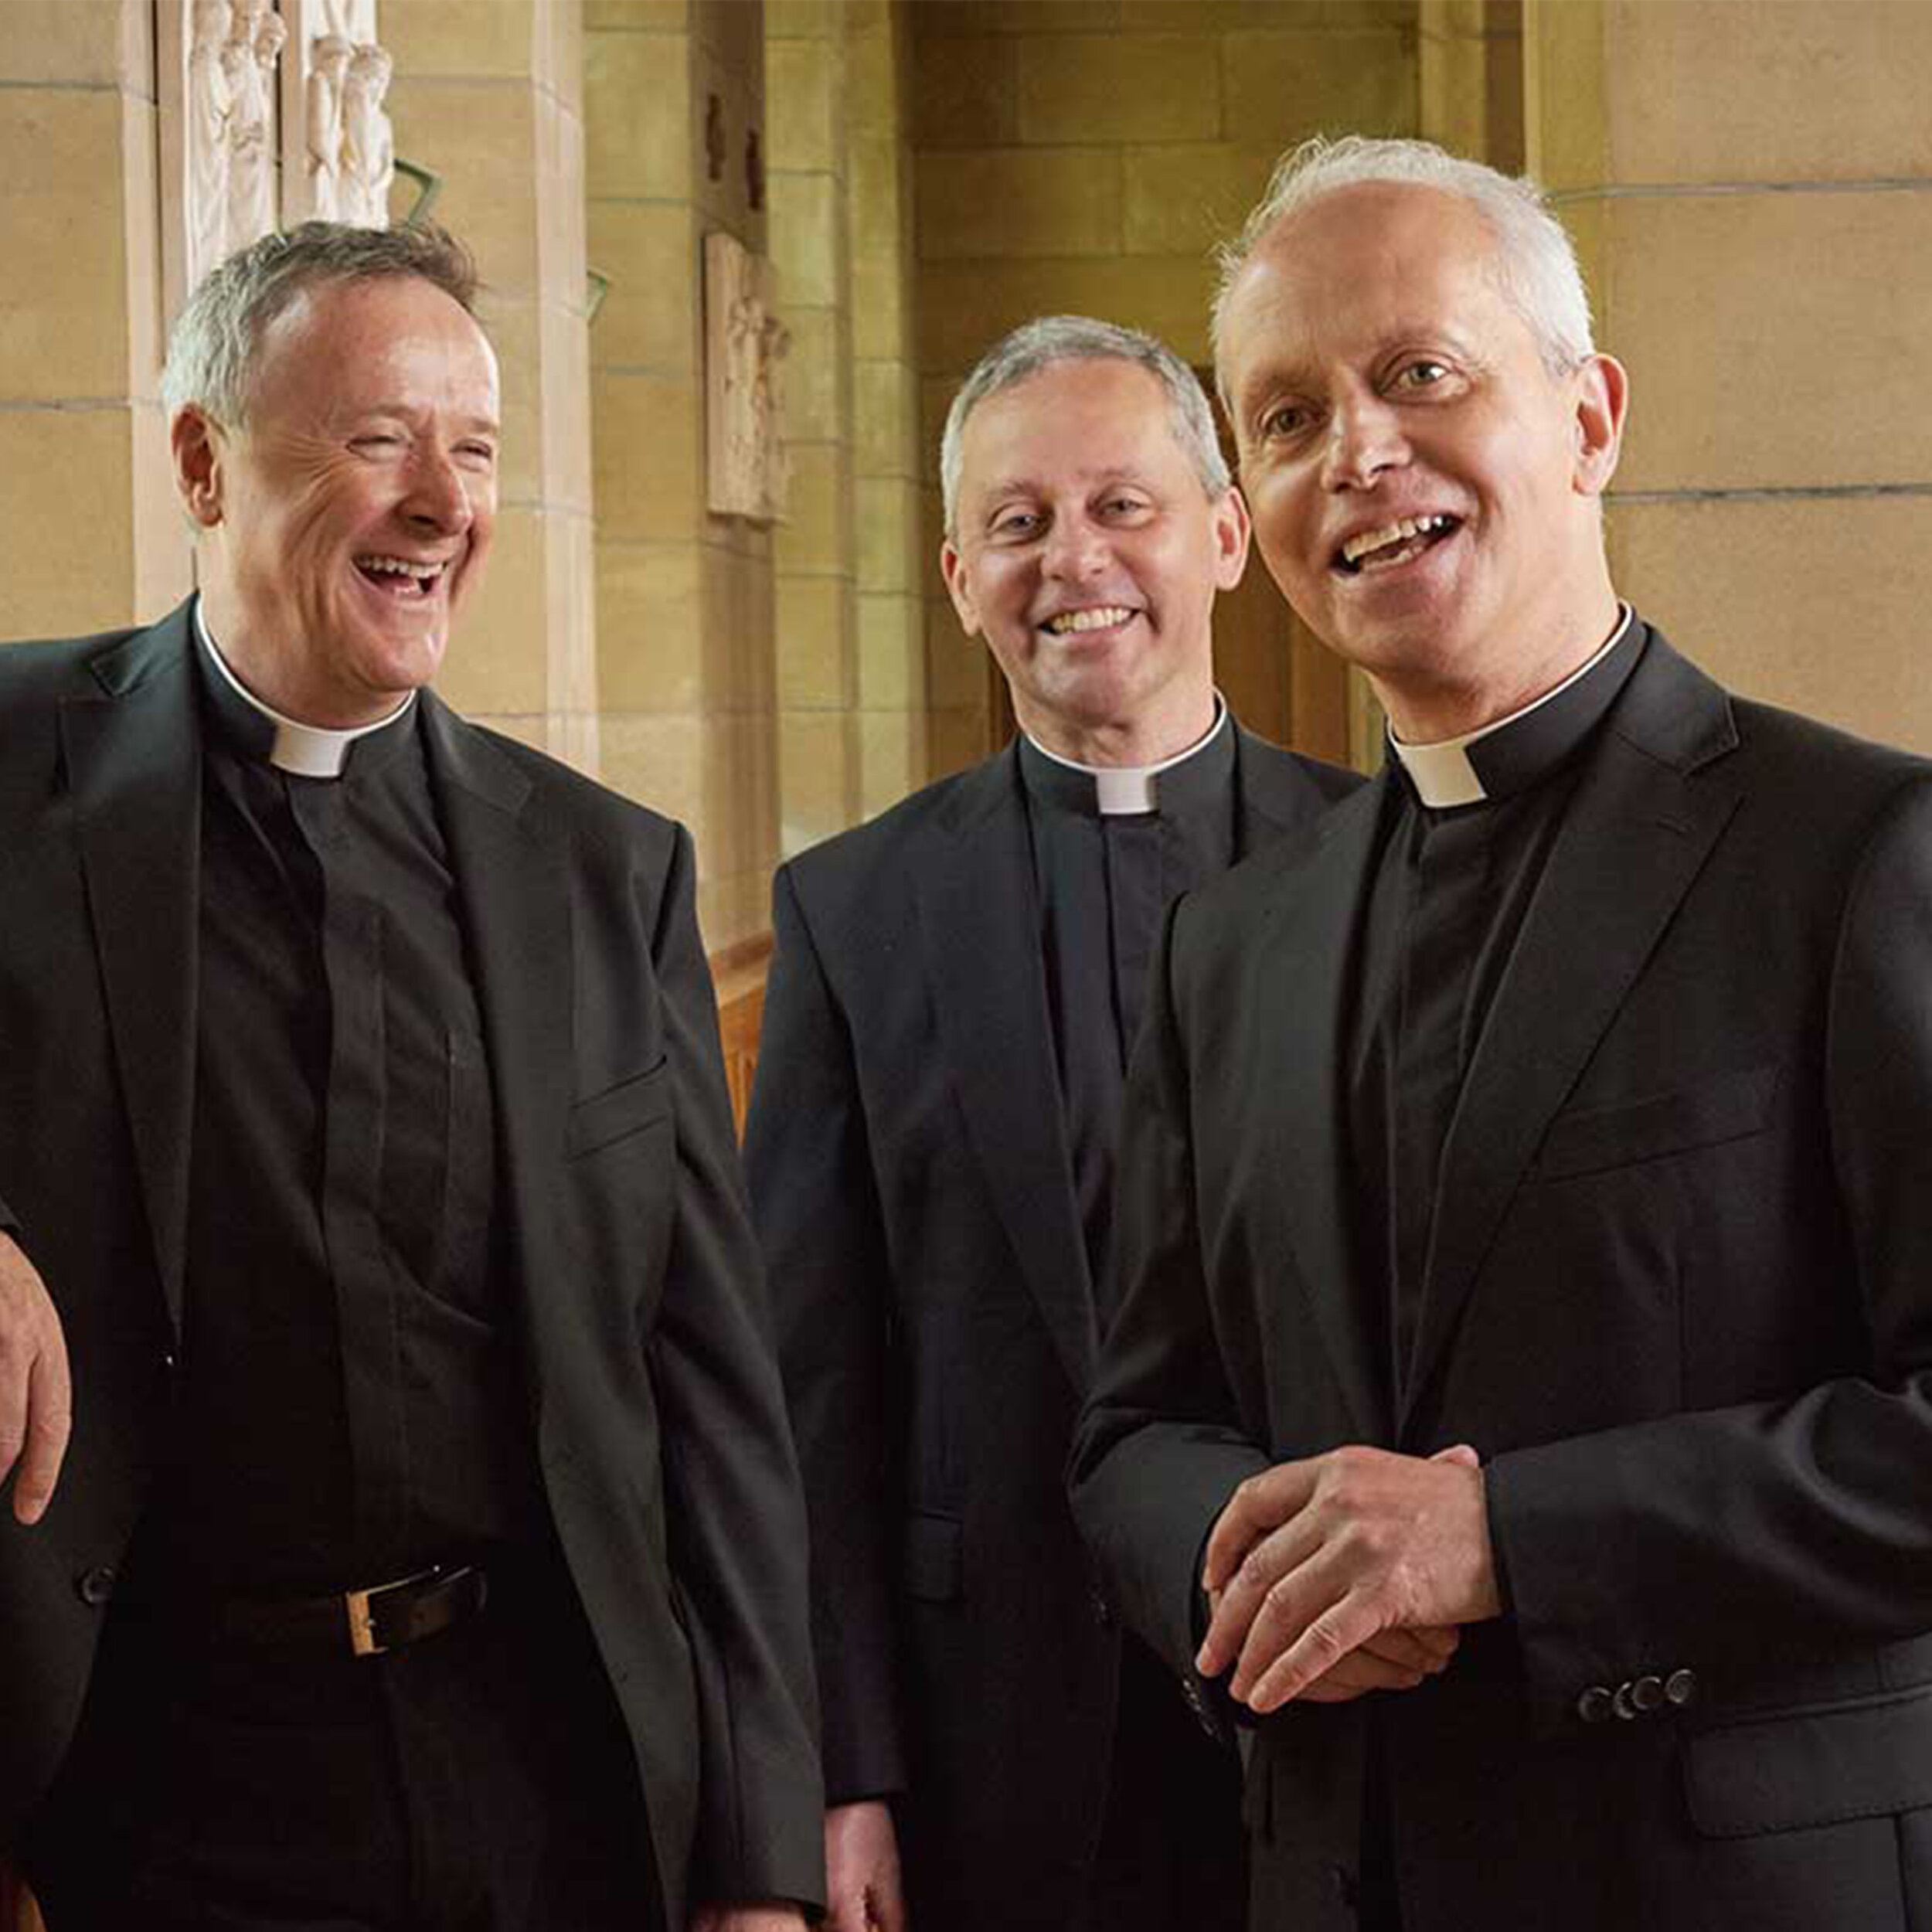 The Priests: Singers, World-Record Holders, Priests